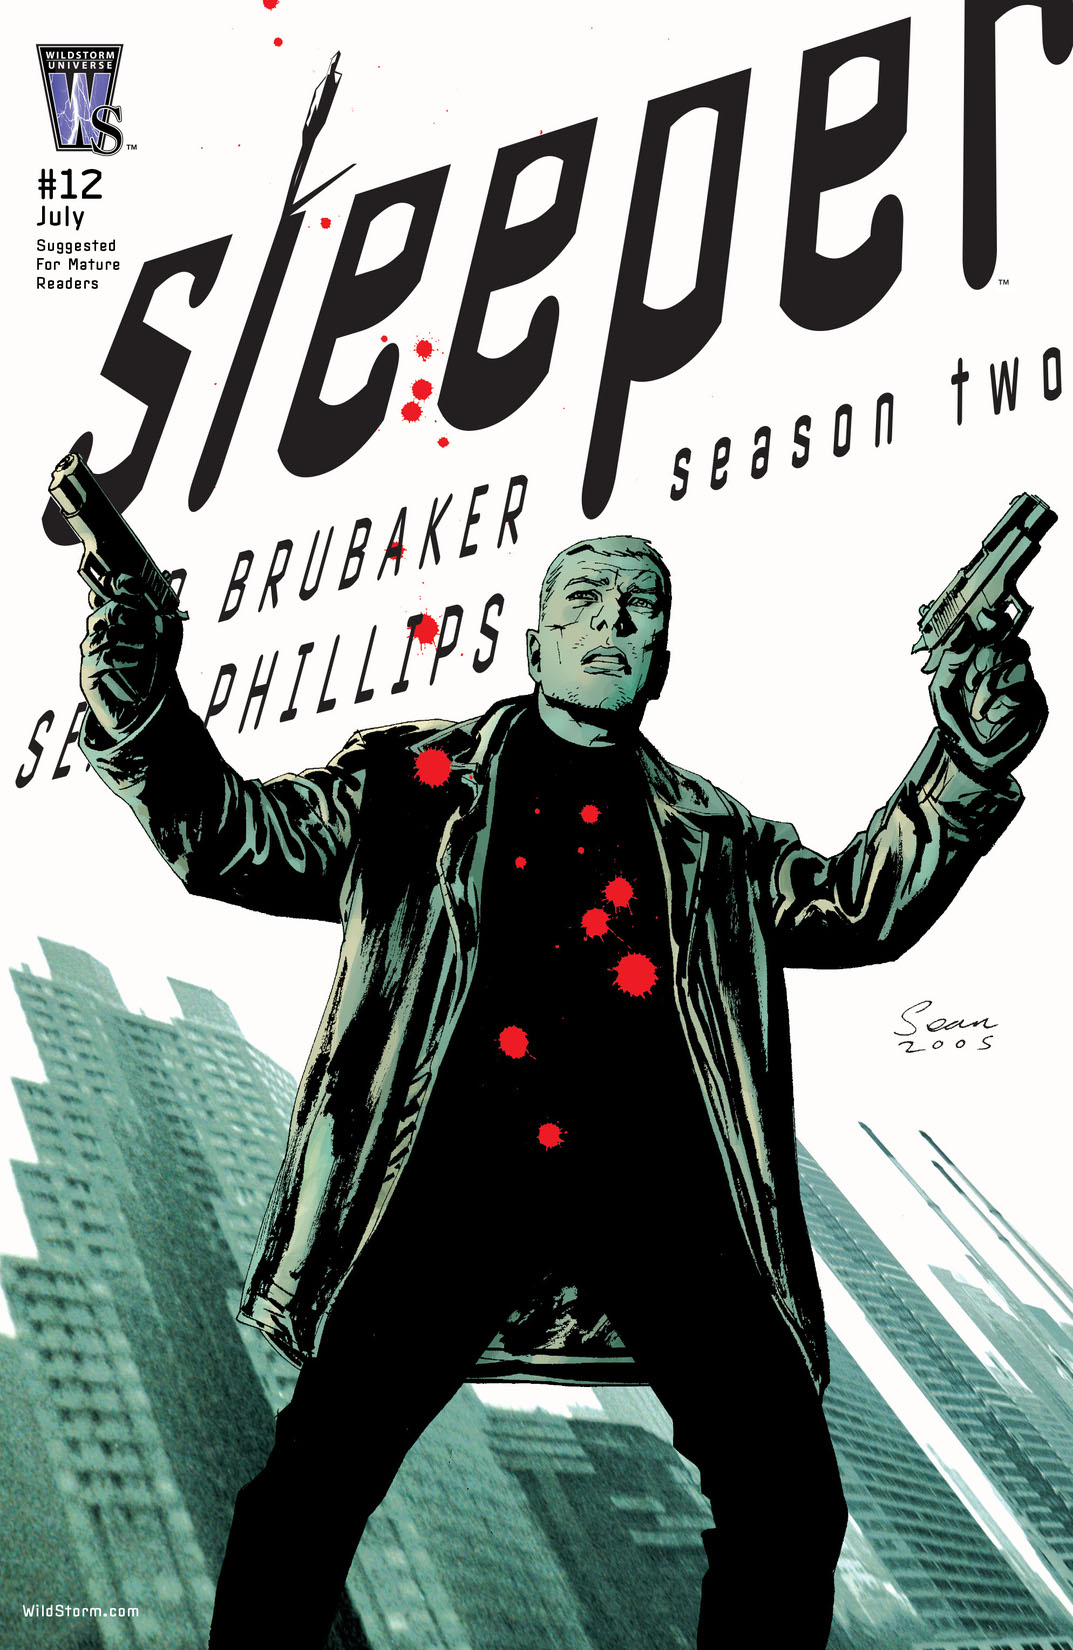 Sleeper Season 2 #12 preview images